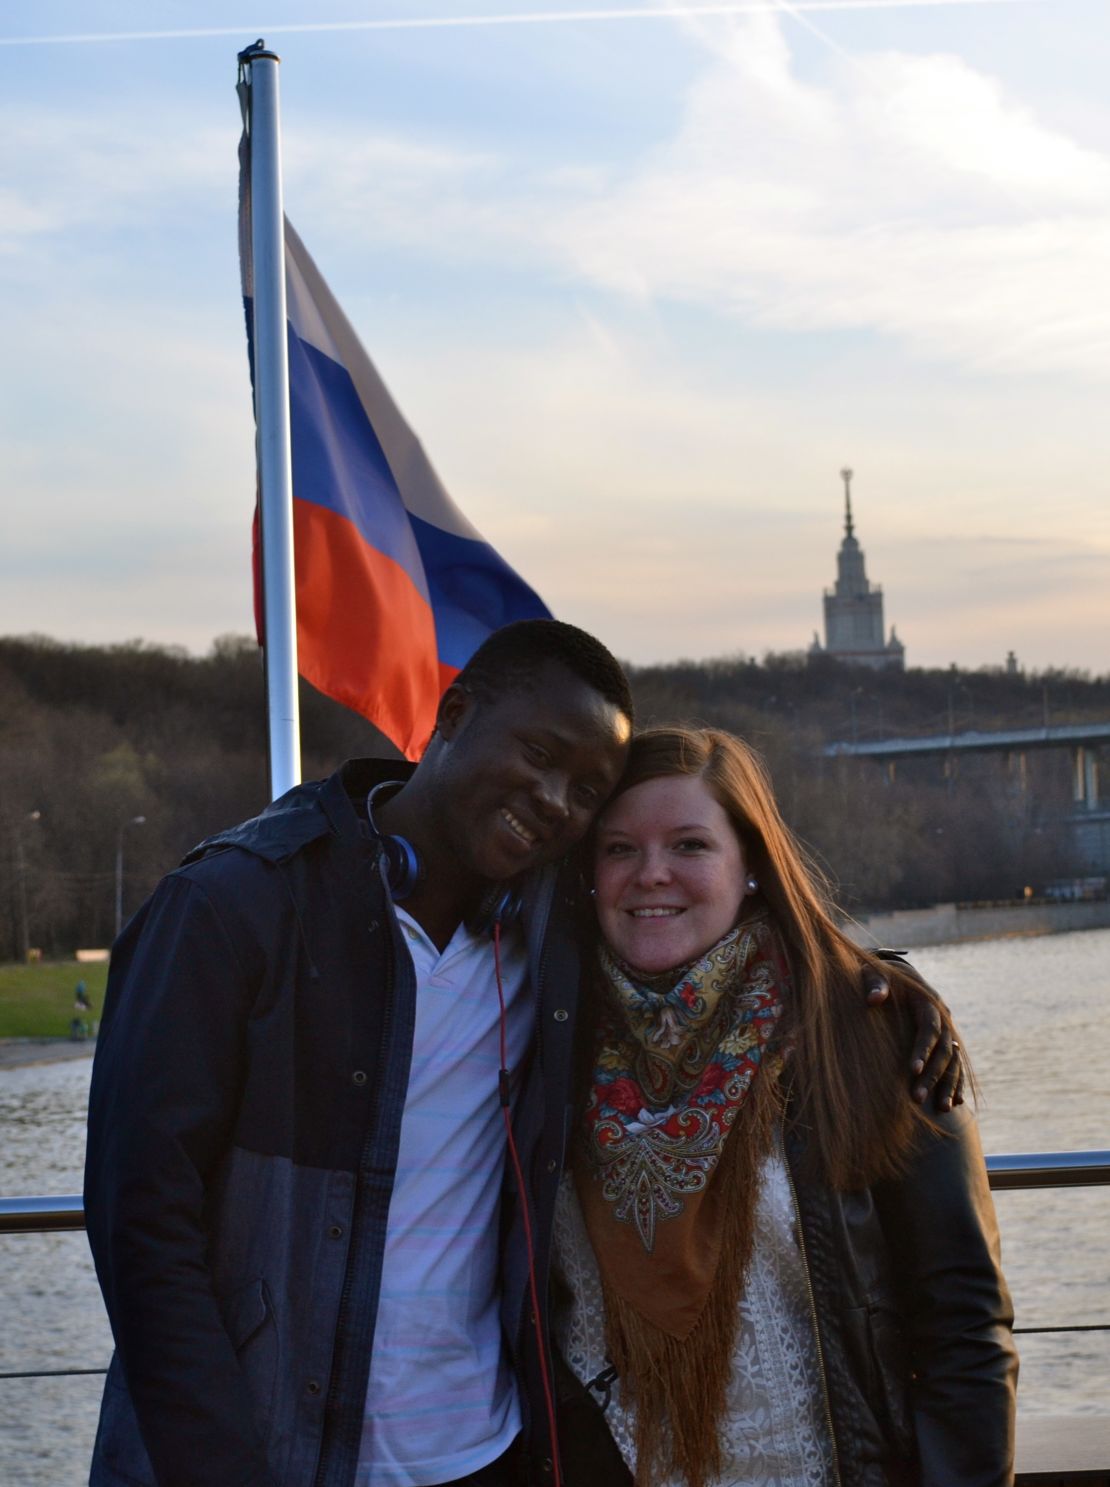 Eric and Kristin Njimegni met in Moscow while studying and working and now live in Keewatin, Minnesota.